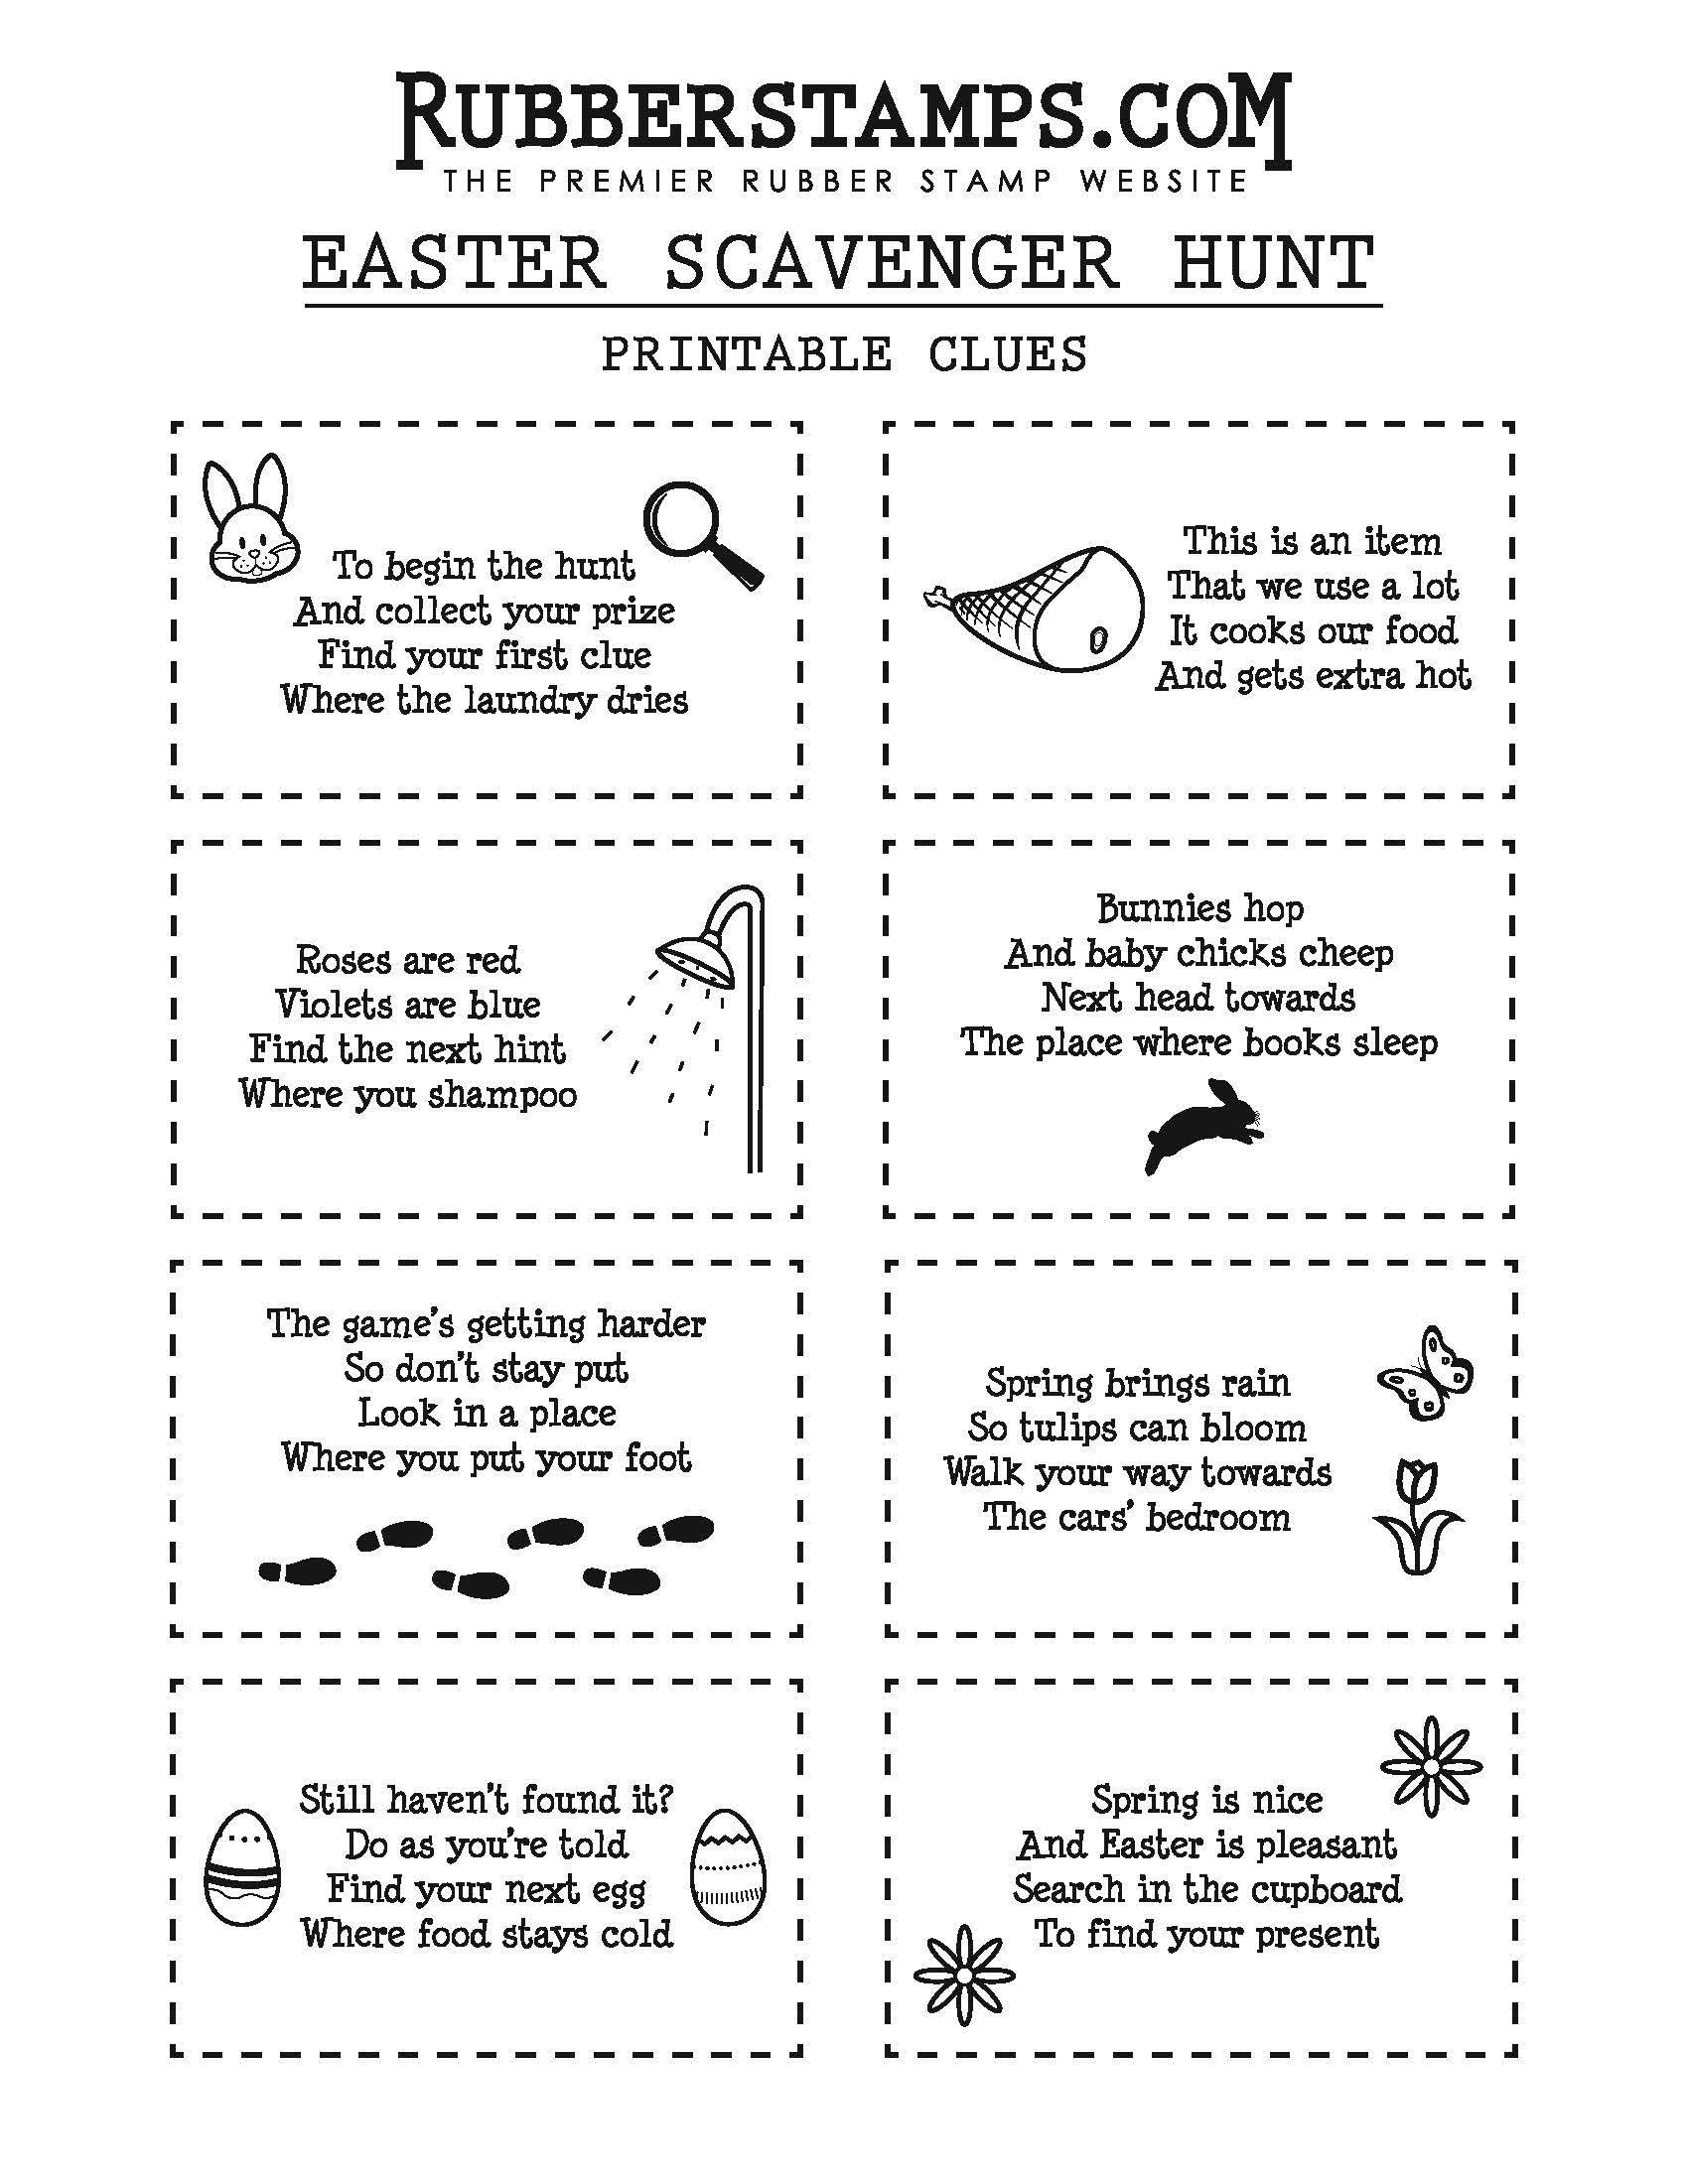 easter egg scavenger hunt clues for adults free outdoor treasure